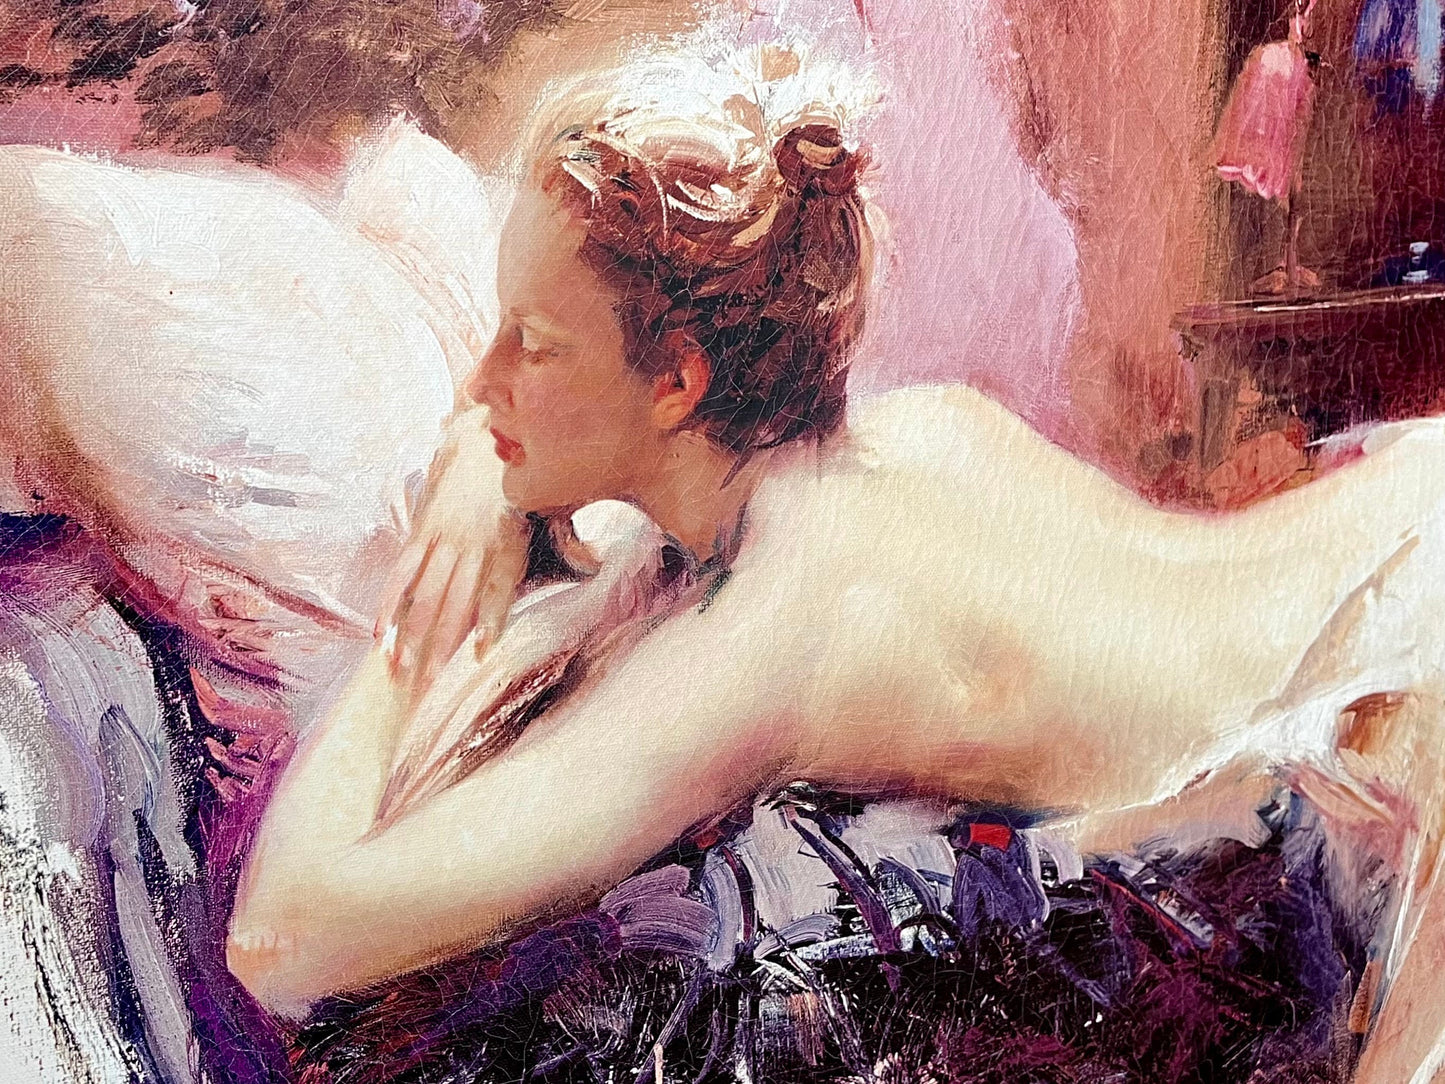 Pino Daeni "Mystic Dreams" Giclee on Canvas #/250 Hand Embellished & Signed Contemporary Expressionist Modern Painting